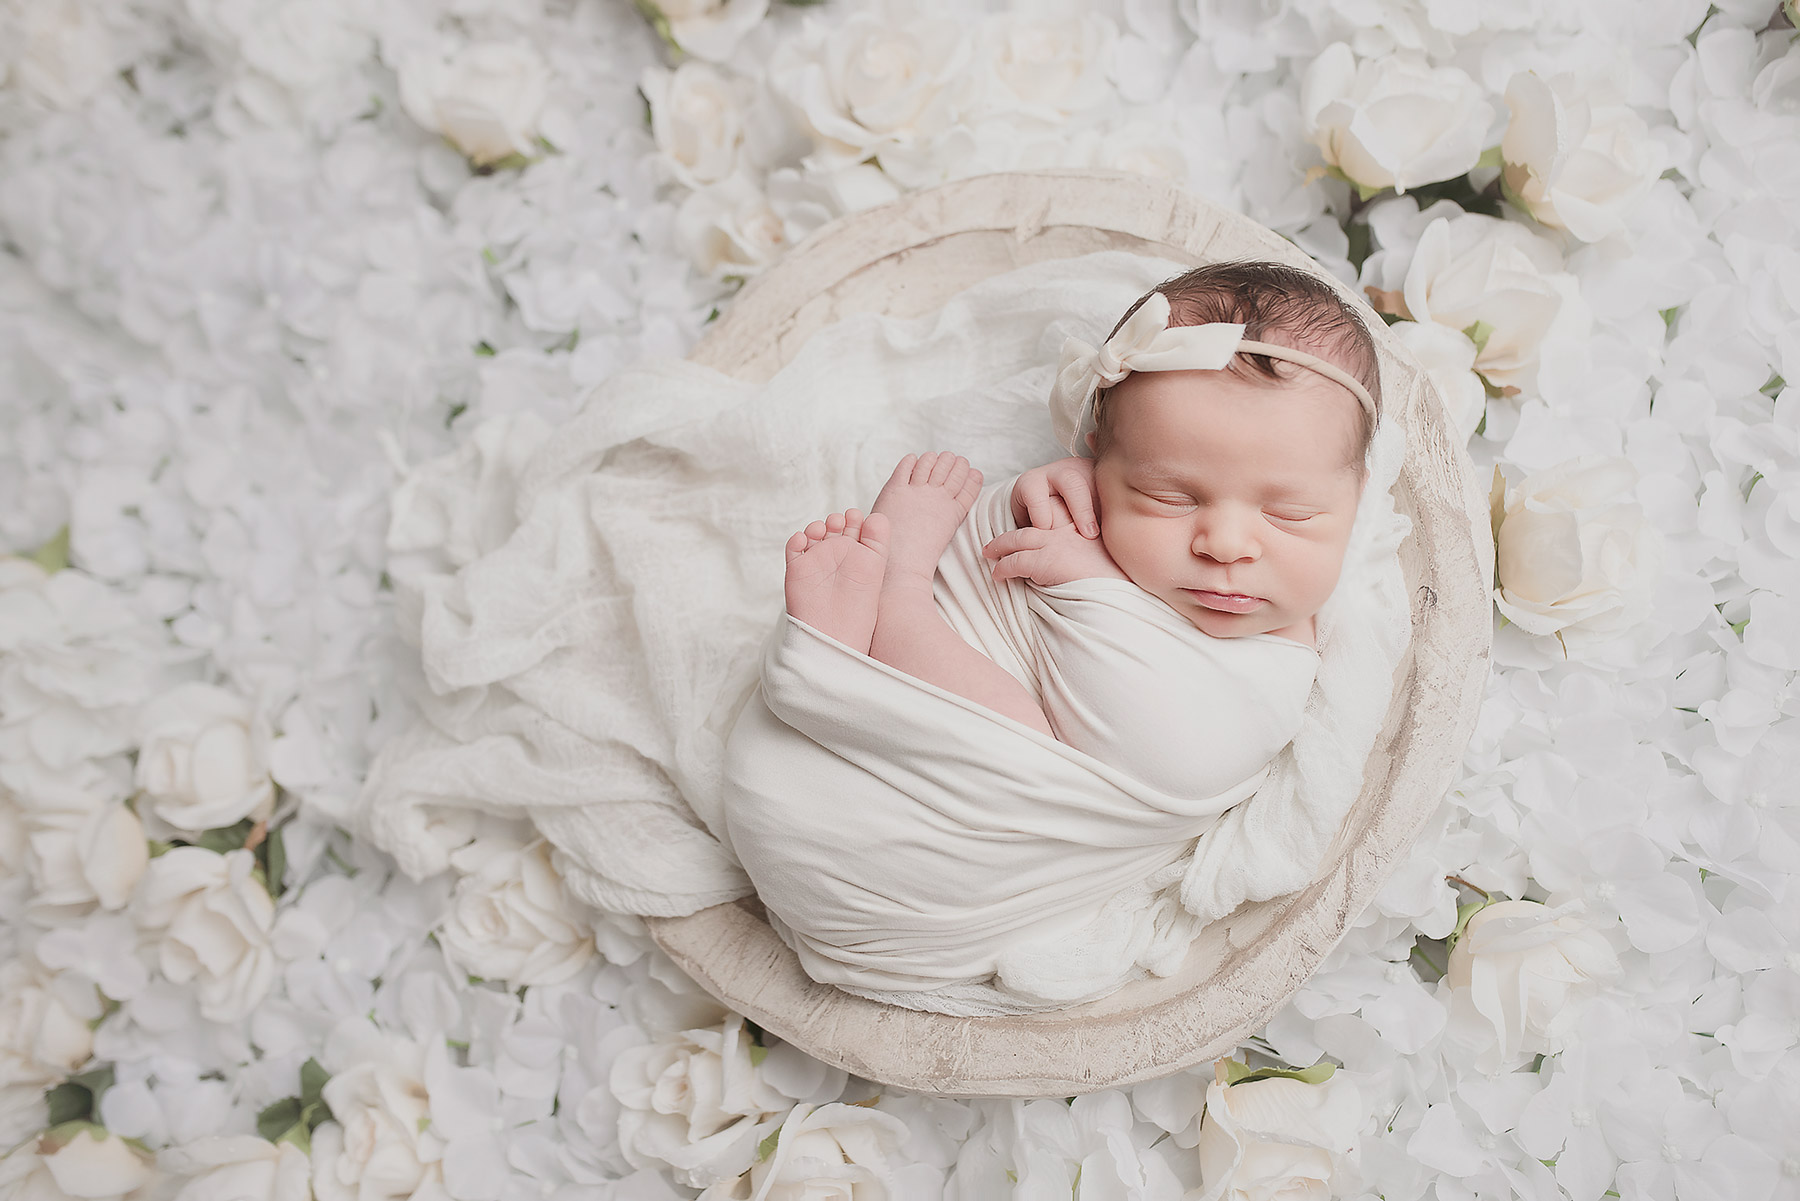 Newborn Photography Tips: Props, Poses, & More